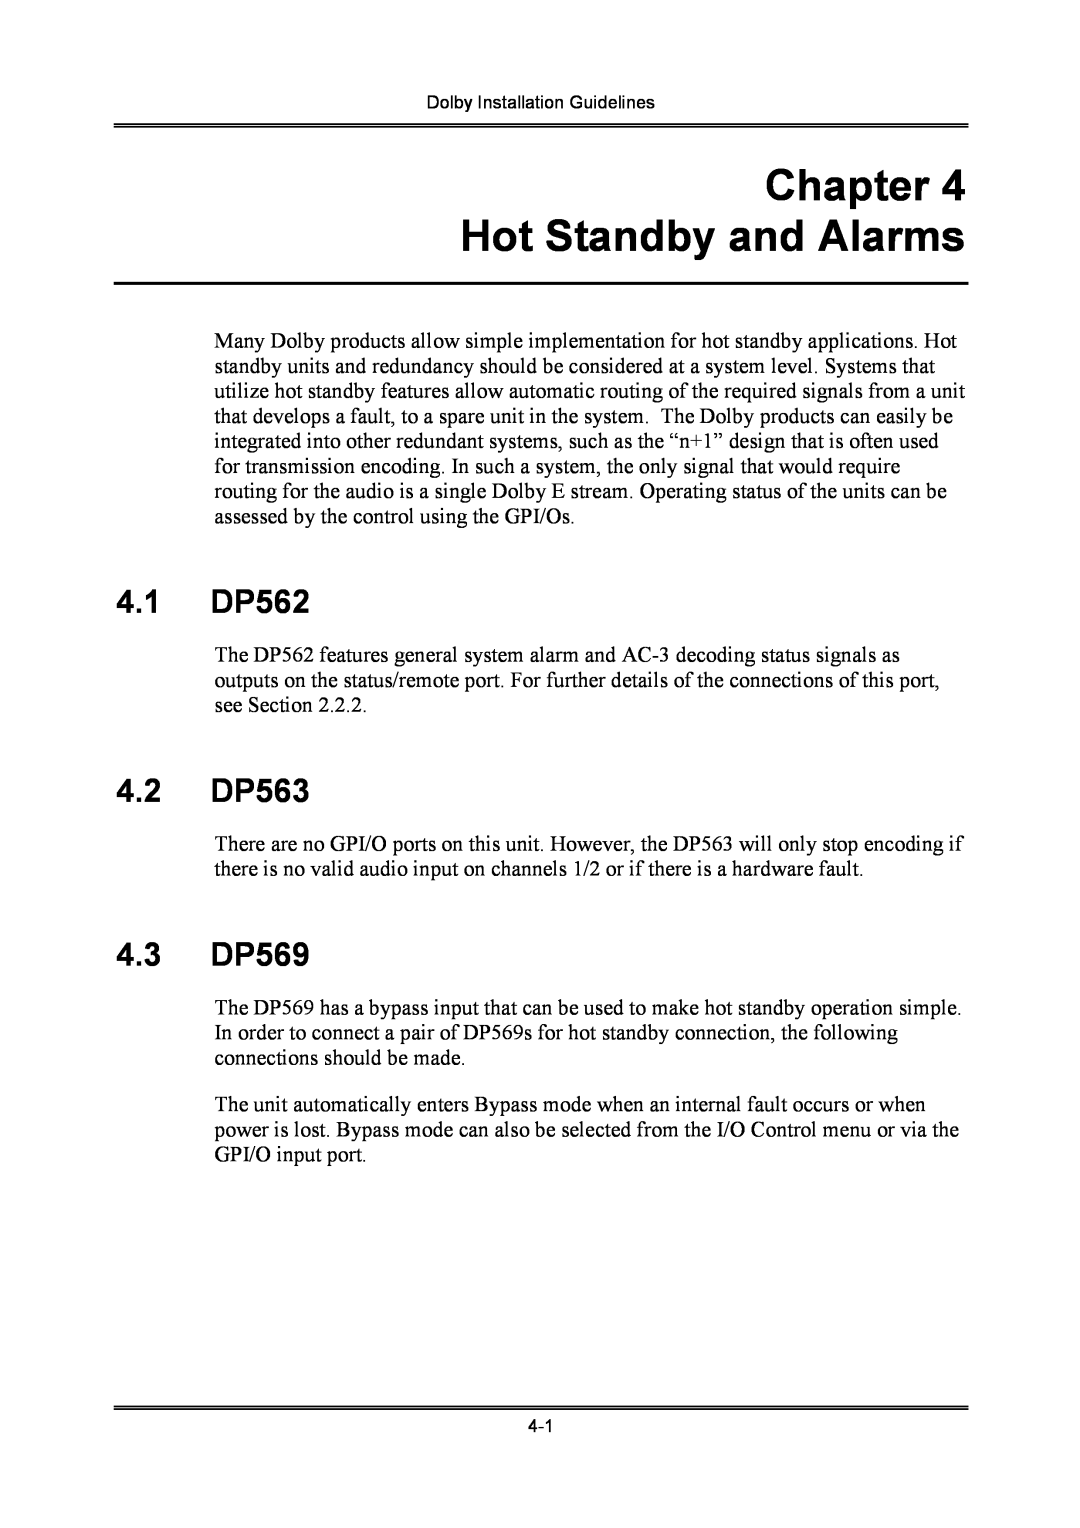 Dolby Laboratories S01/13621 manual Chapter Hot Standby and Alarms, 4.1DP562, 4.2DP563, 4.3DP569 